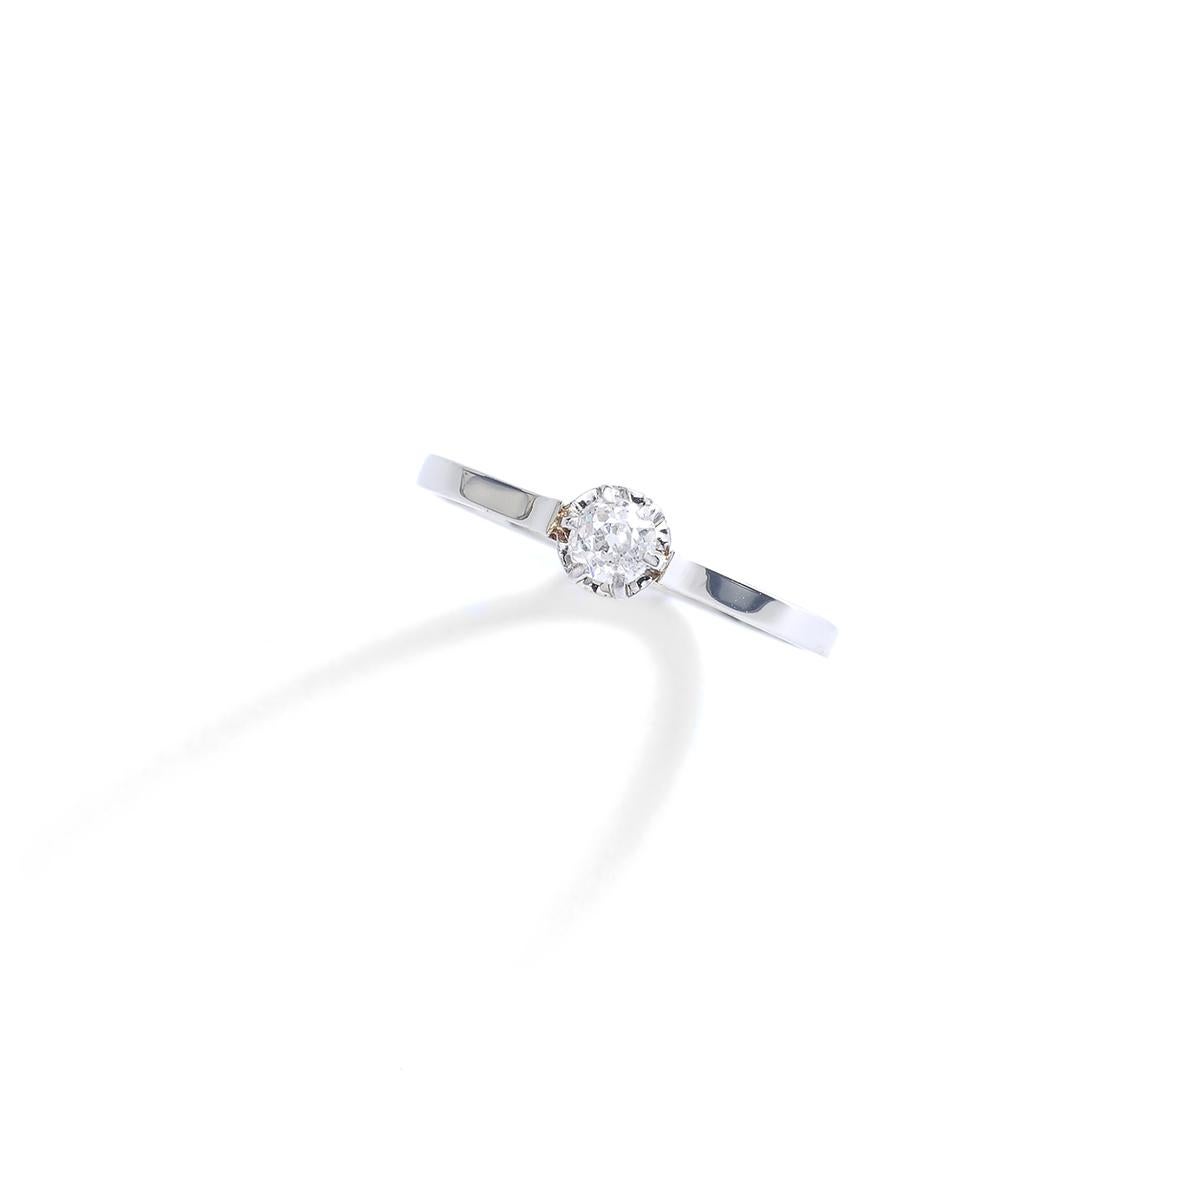 Antique Diamond 0.15 carat Solitaire Platinum and white Gold Ring. 
Circa 1900.

Gross weight: 1.25 grams.